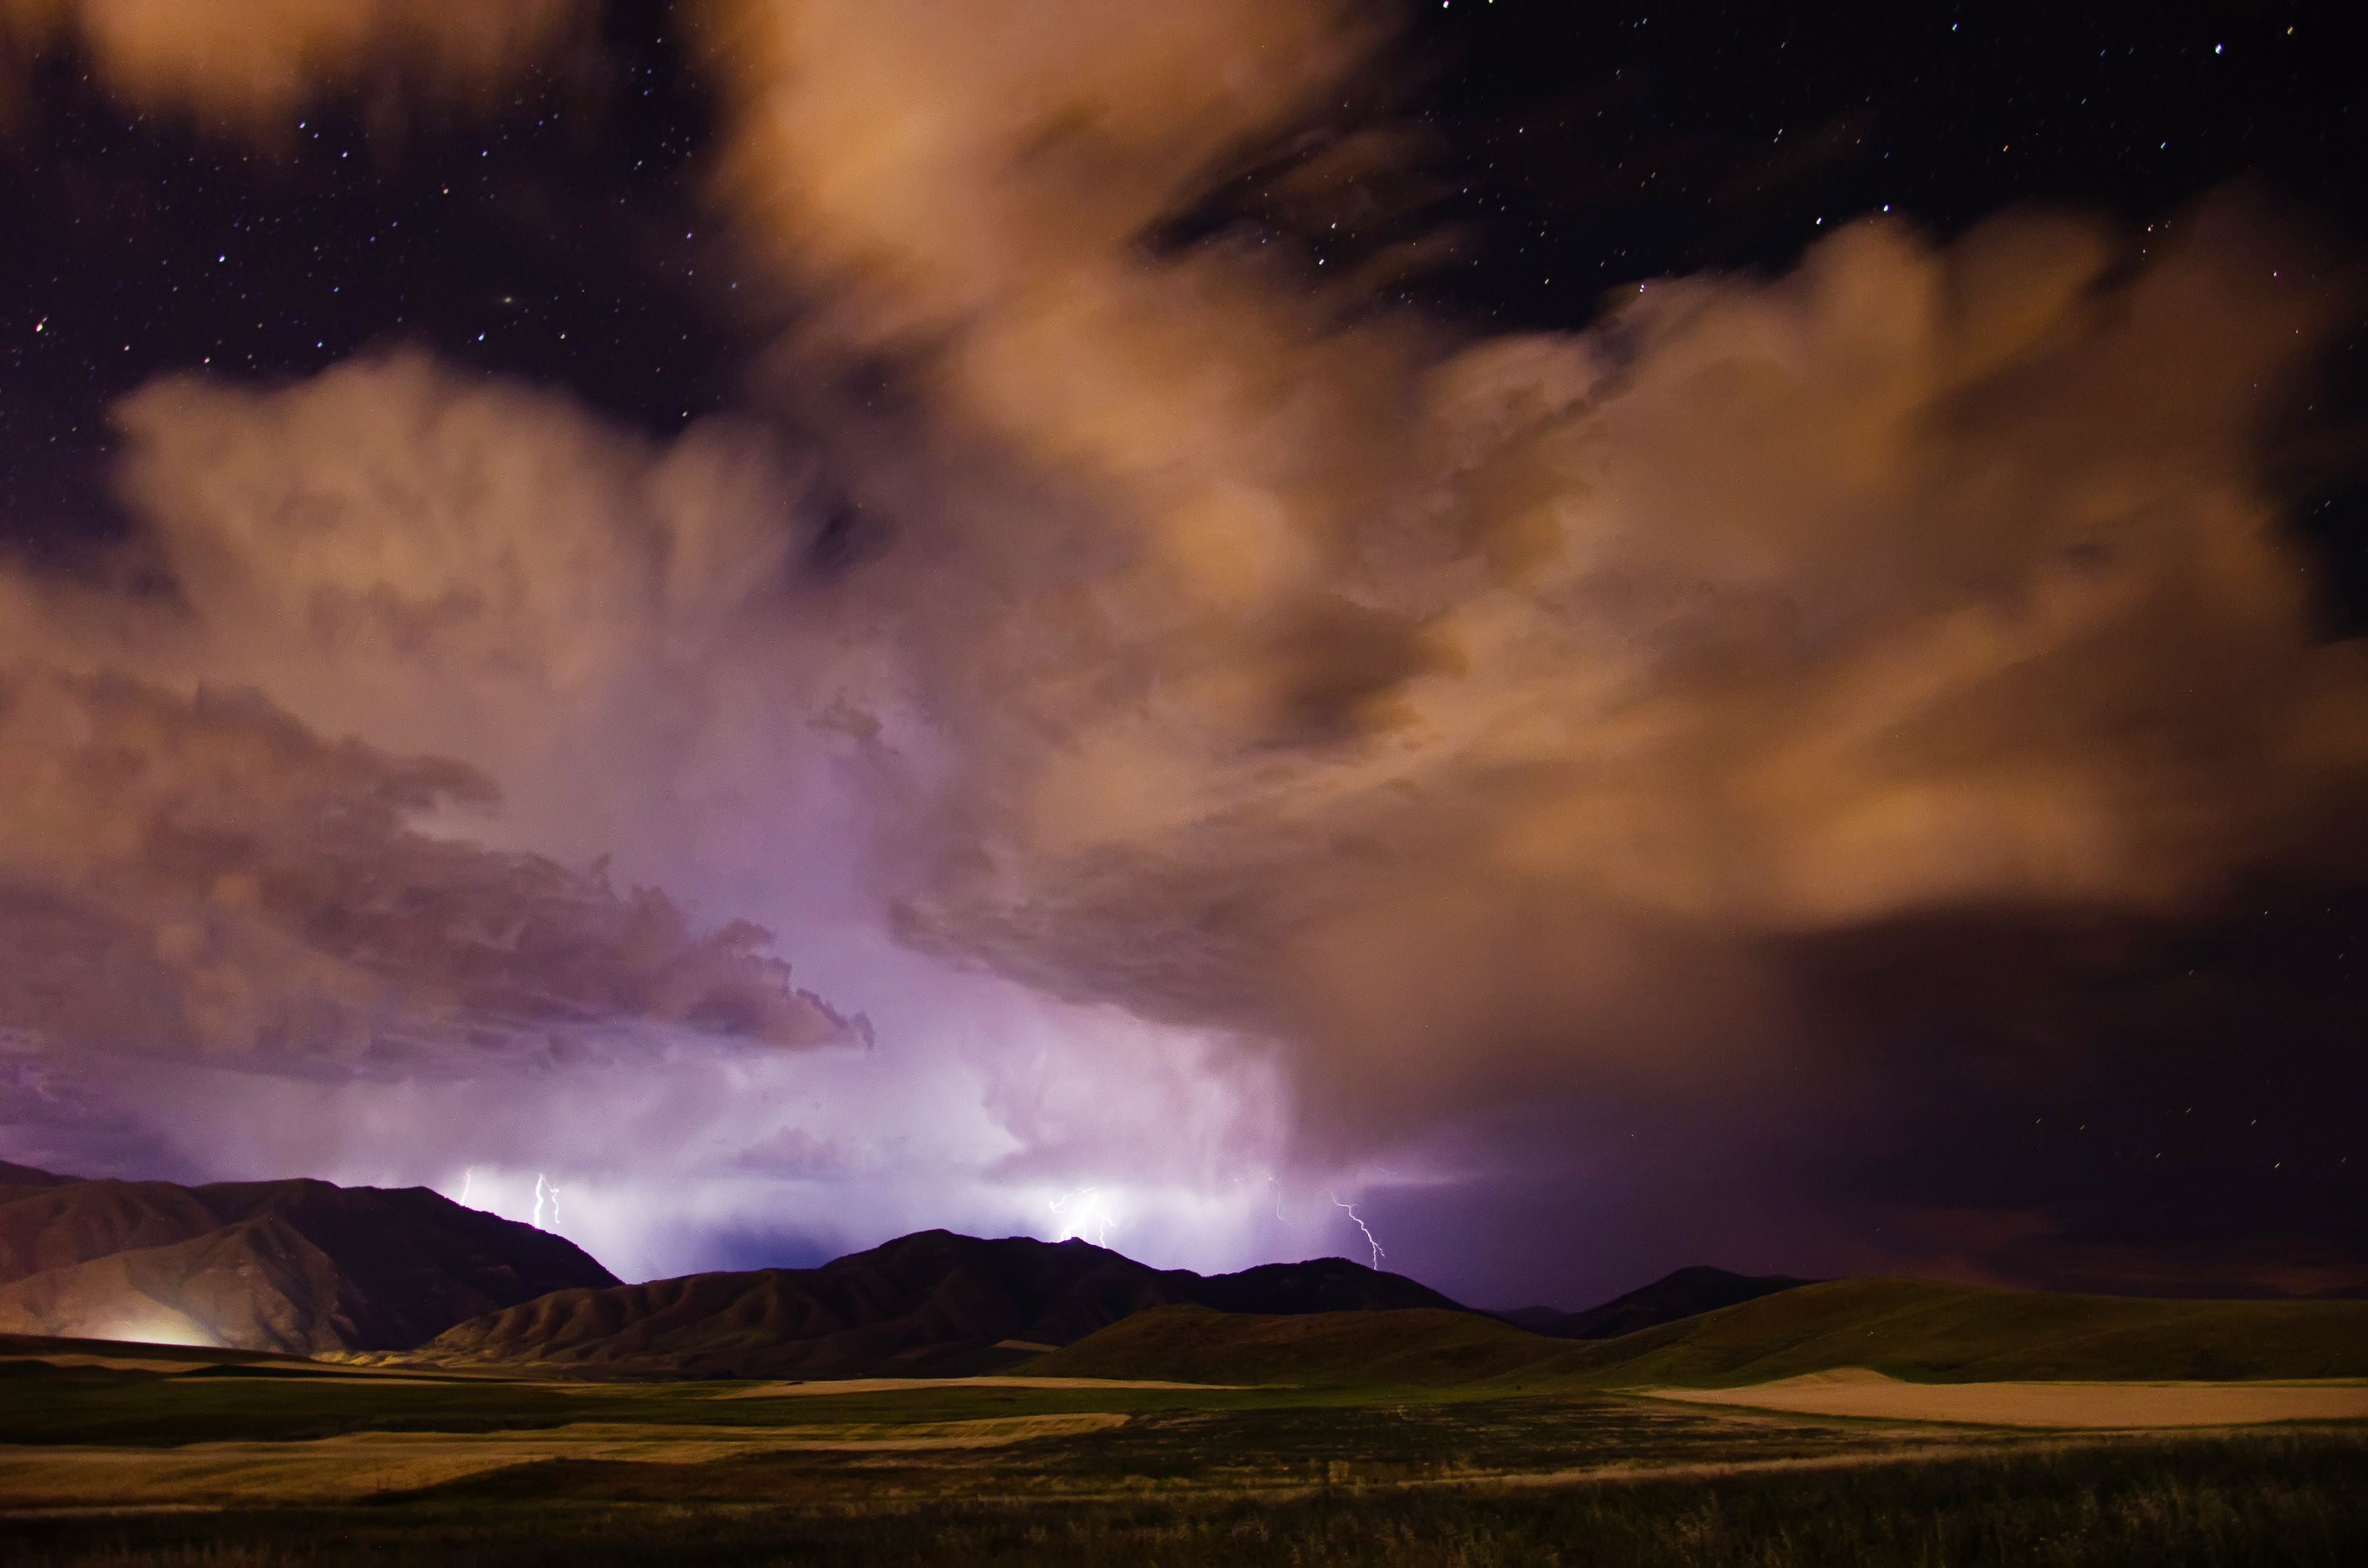 Lightning striking over a mountain range surrounded by large storm clouds at night.